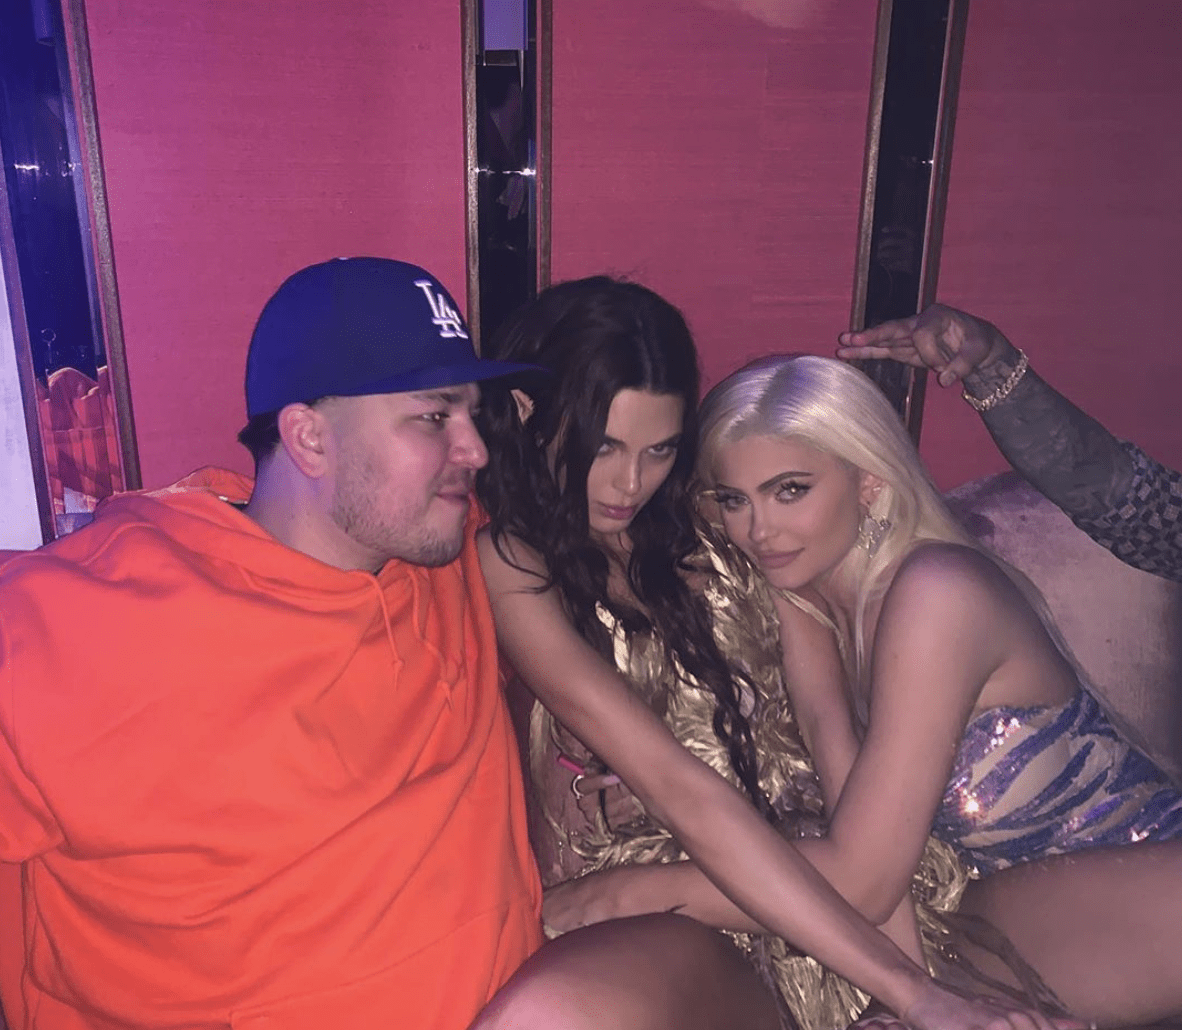 Kylie Jenner Poses With Rob Kardashian And Her Sister, Kendall Jenner